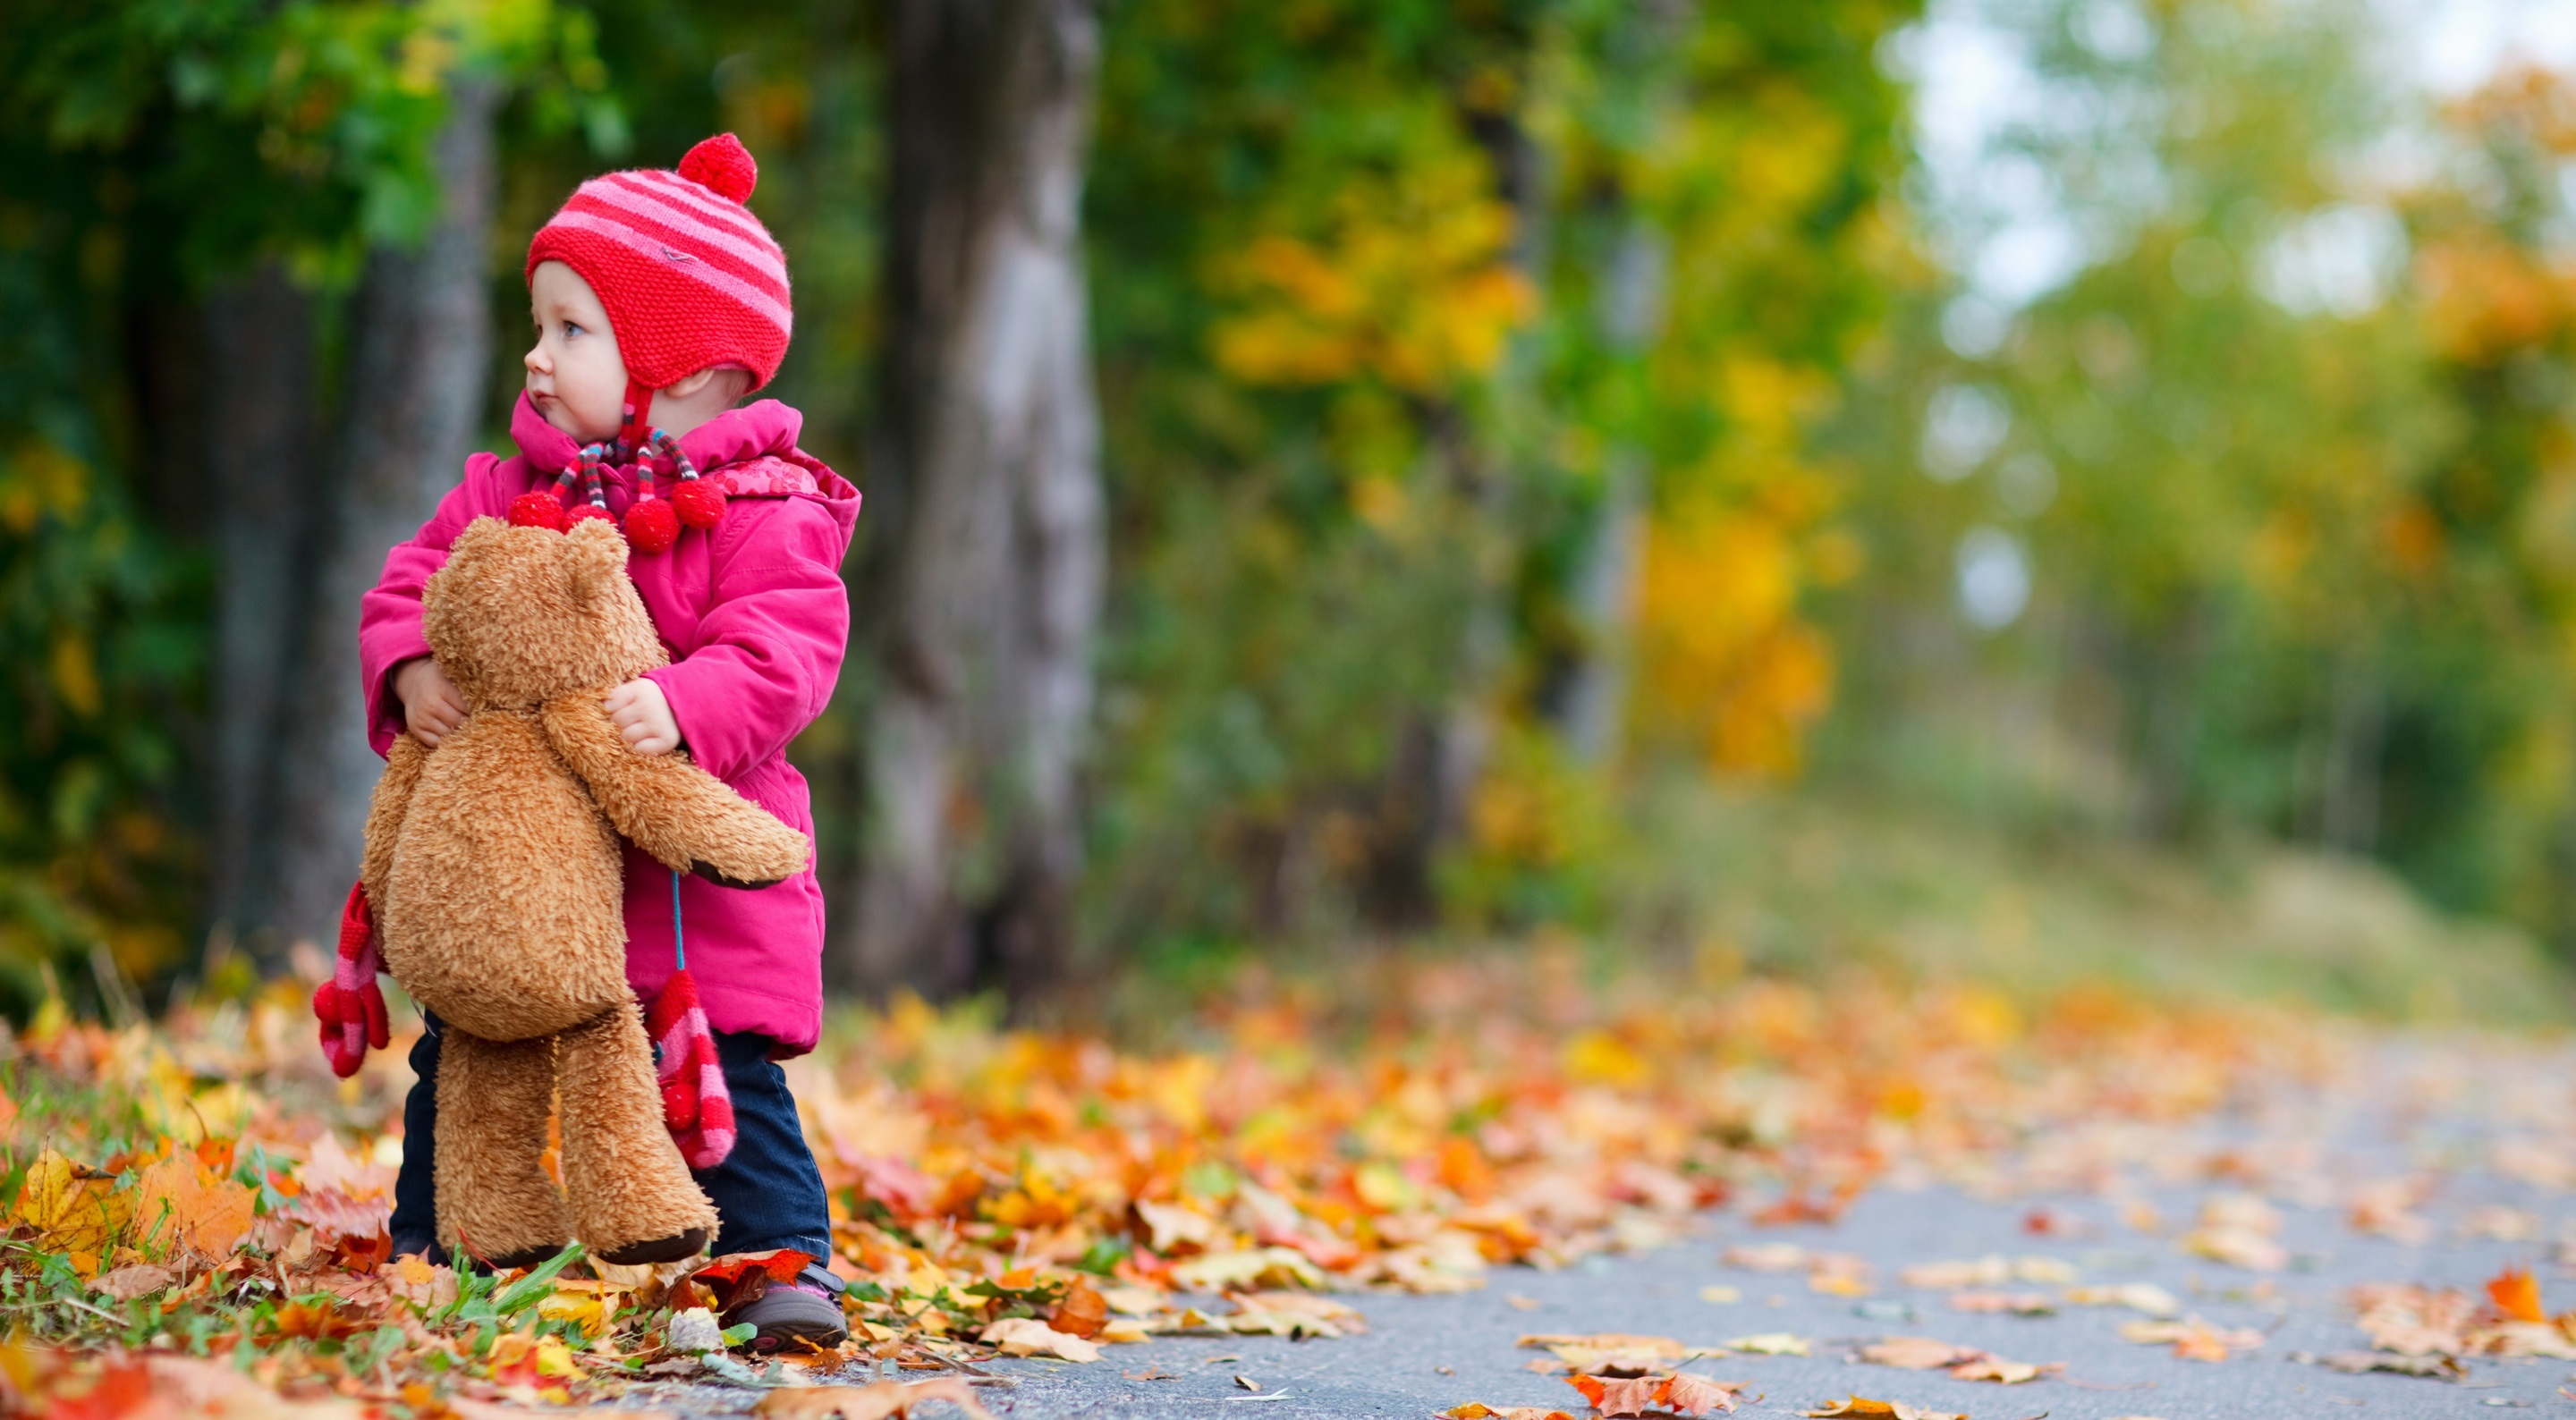 baby wallpaper hd,people in nature,leaf,child,red,autumn